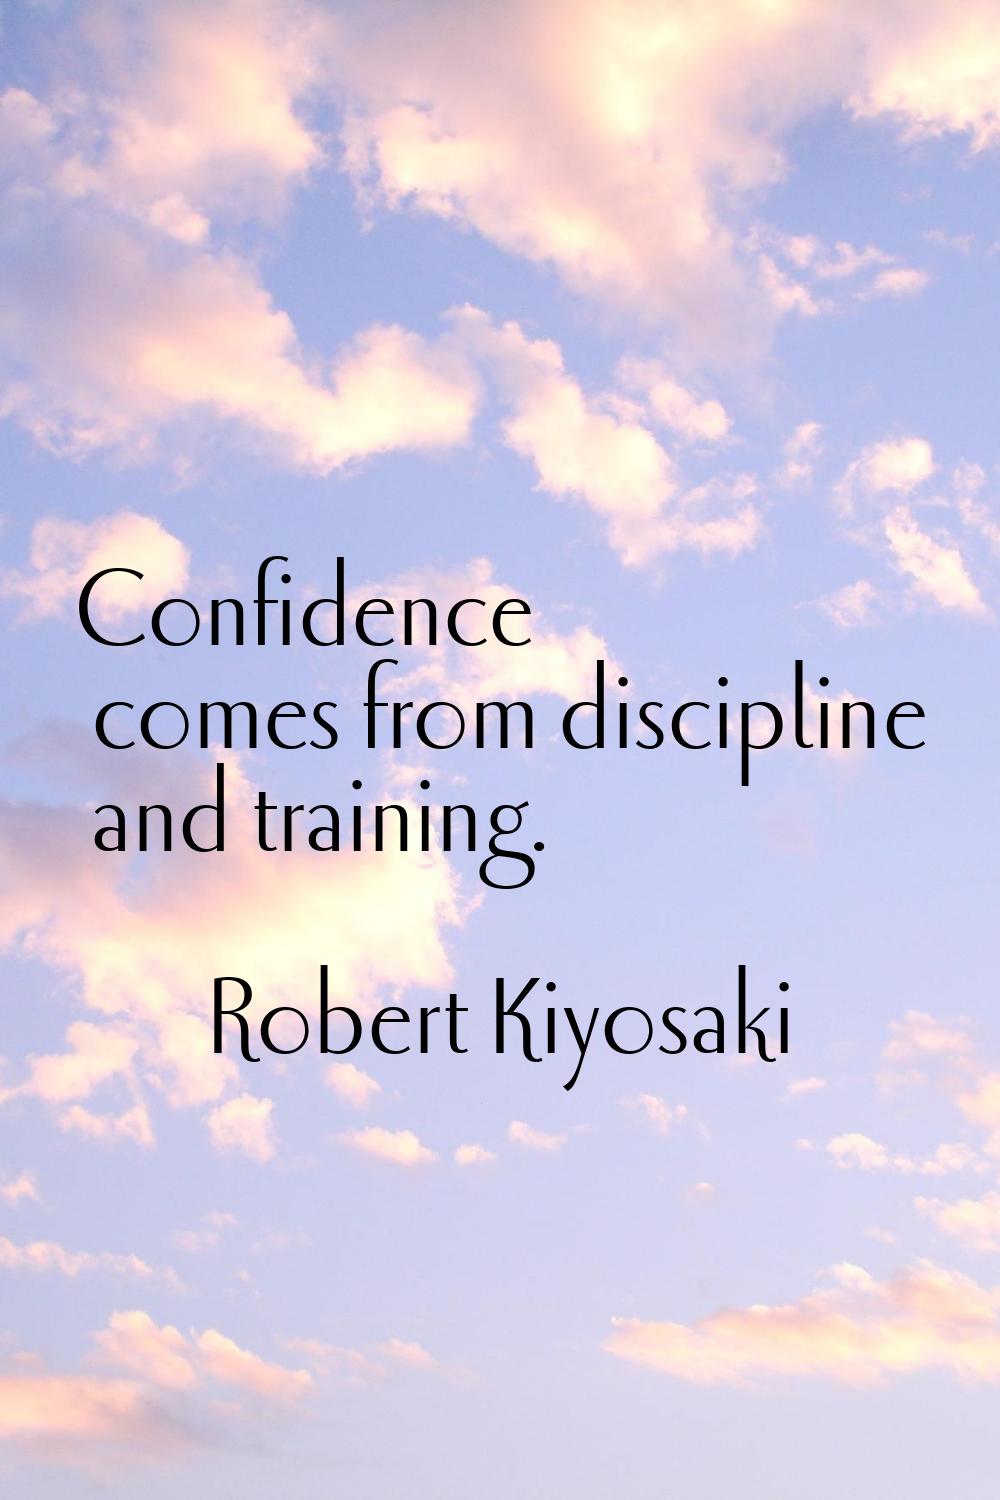 Confidence comes from discipline and training.